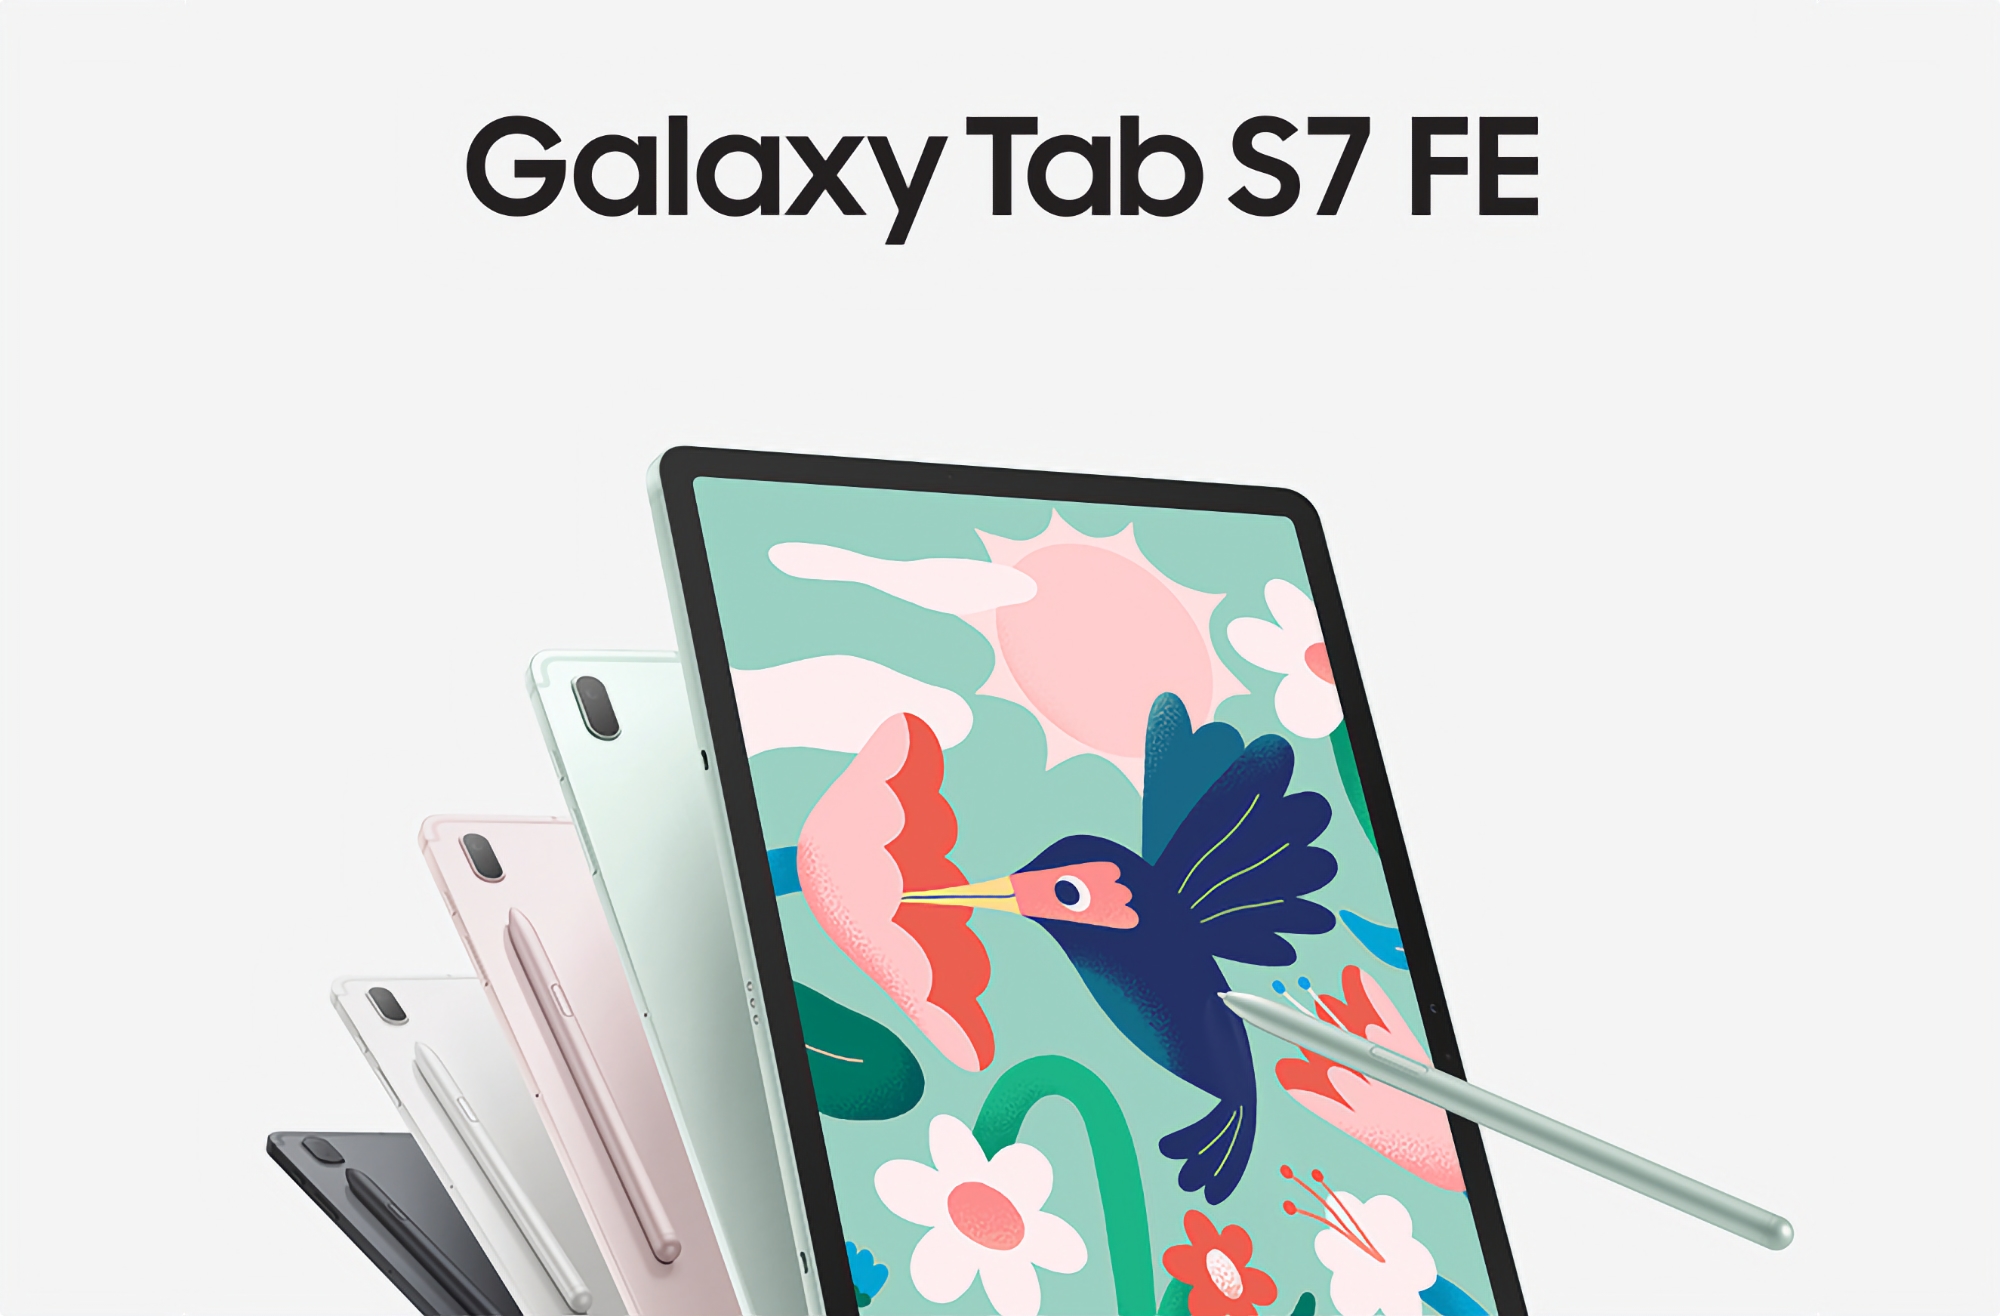 Samsung has released a new software update for the Galaxy Tab S7 FE (spoiler: it's not One UI 5.1)